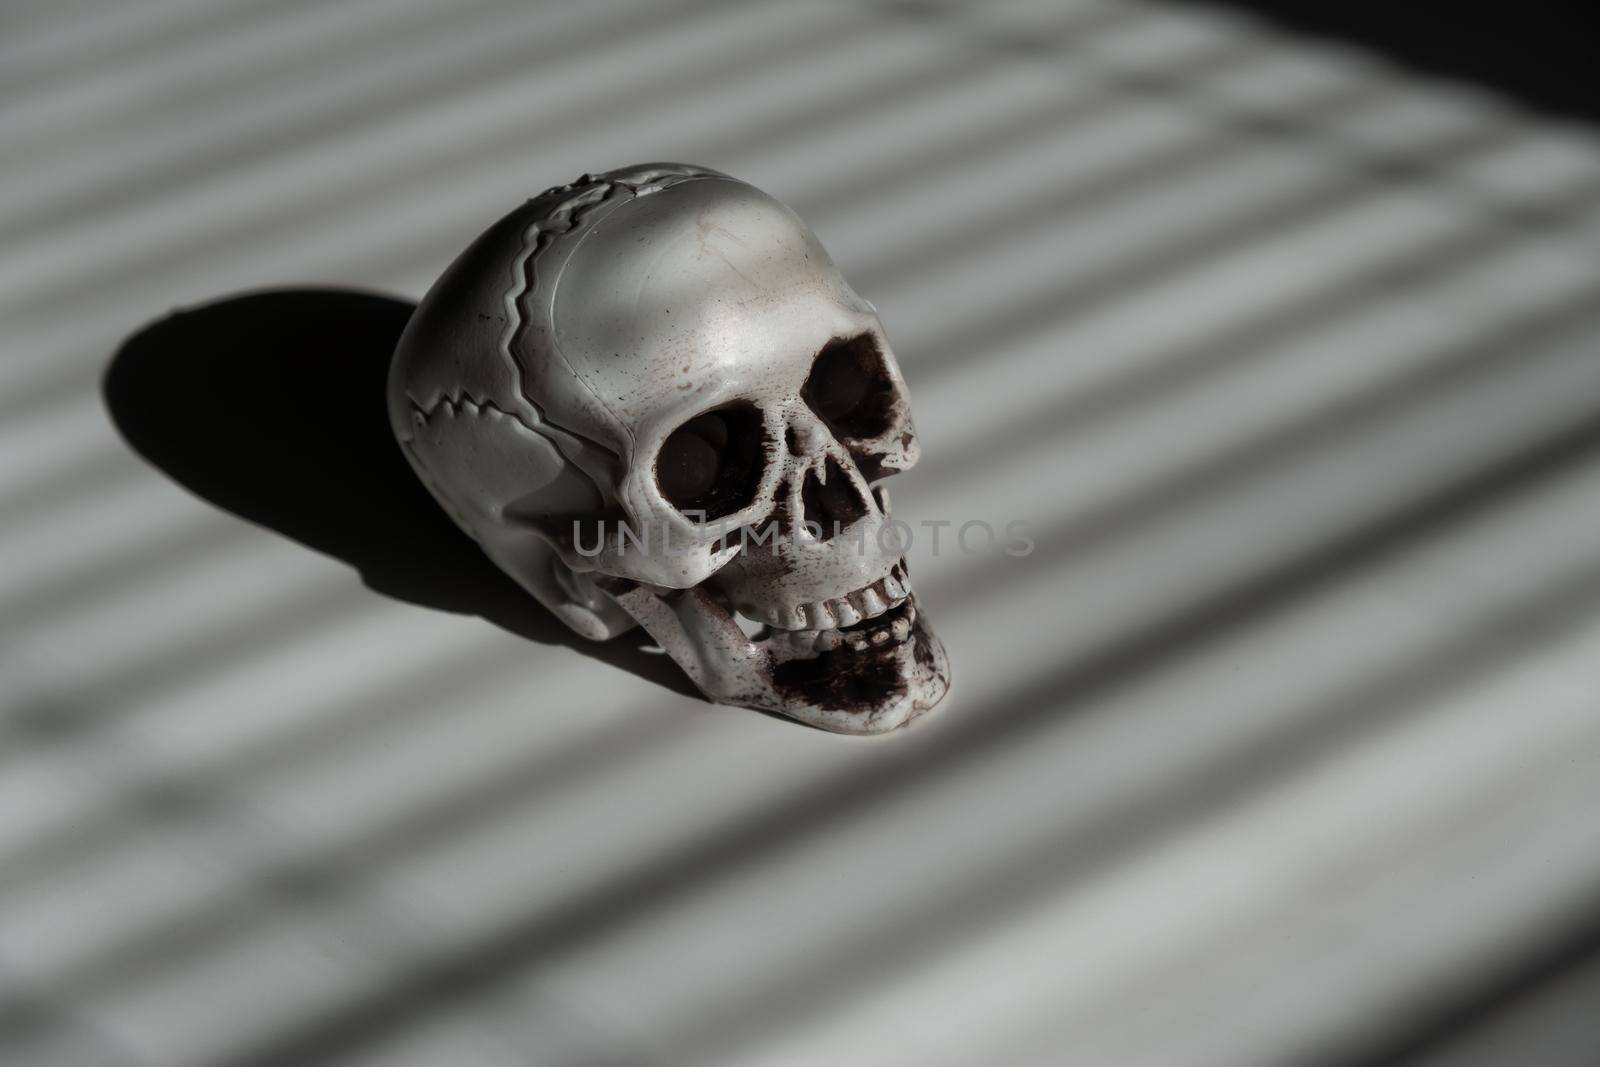 Blinds shadow on a plastic skull on a white table.